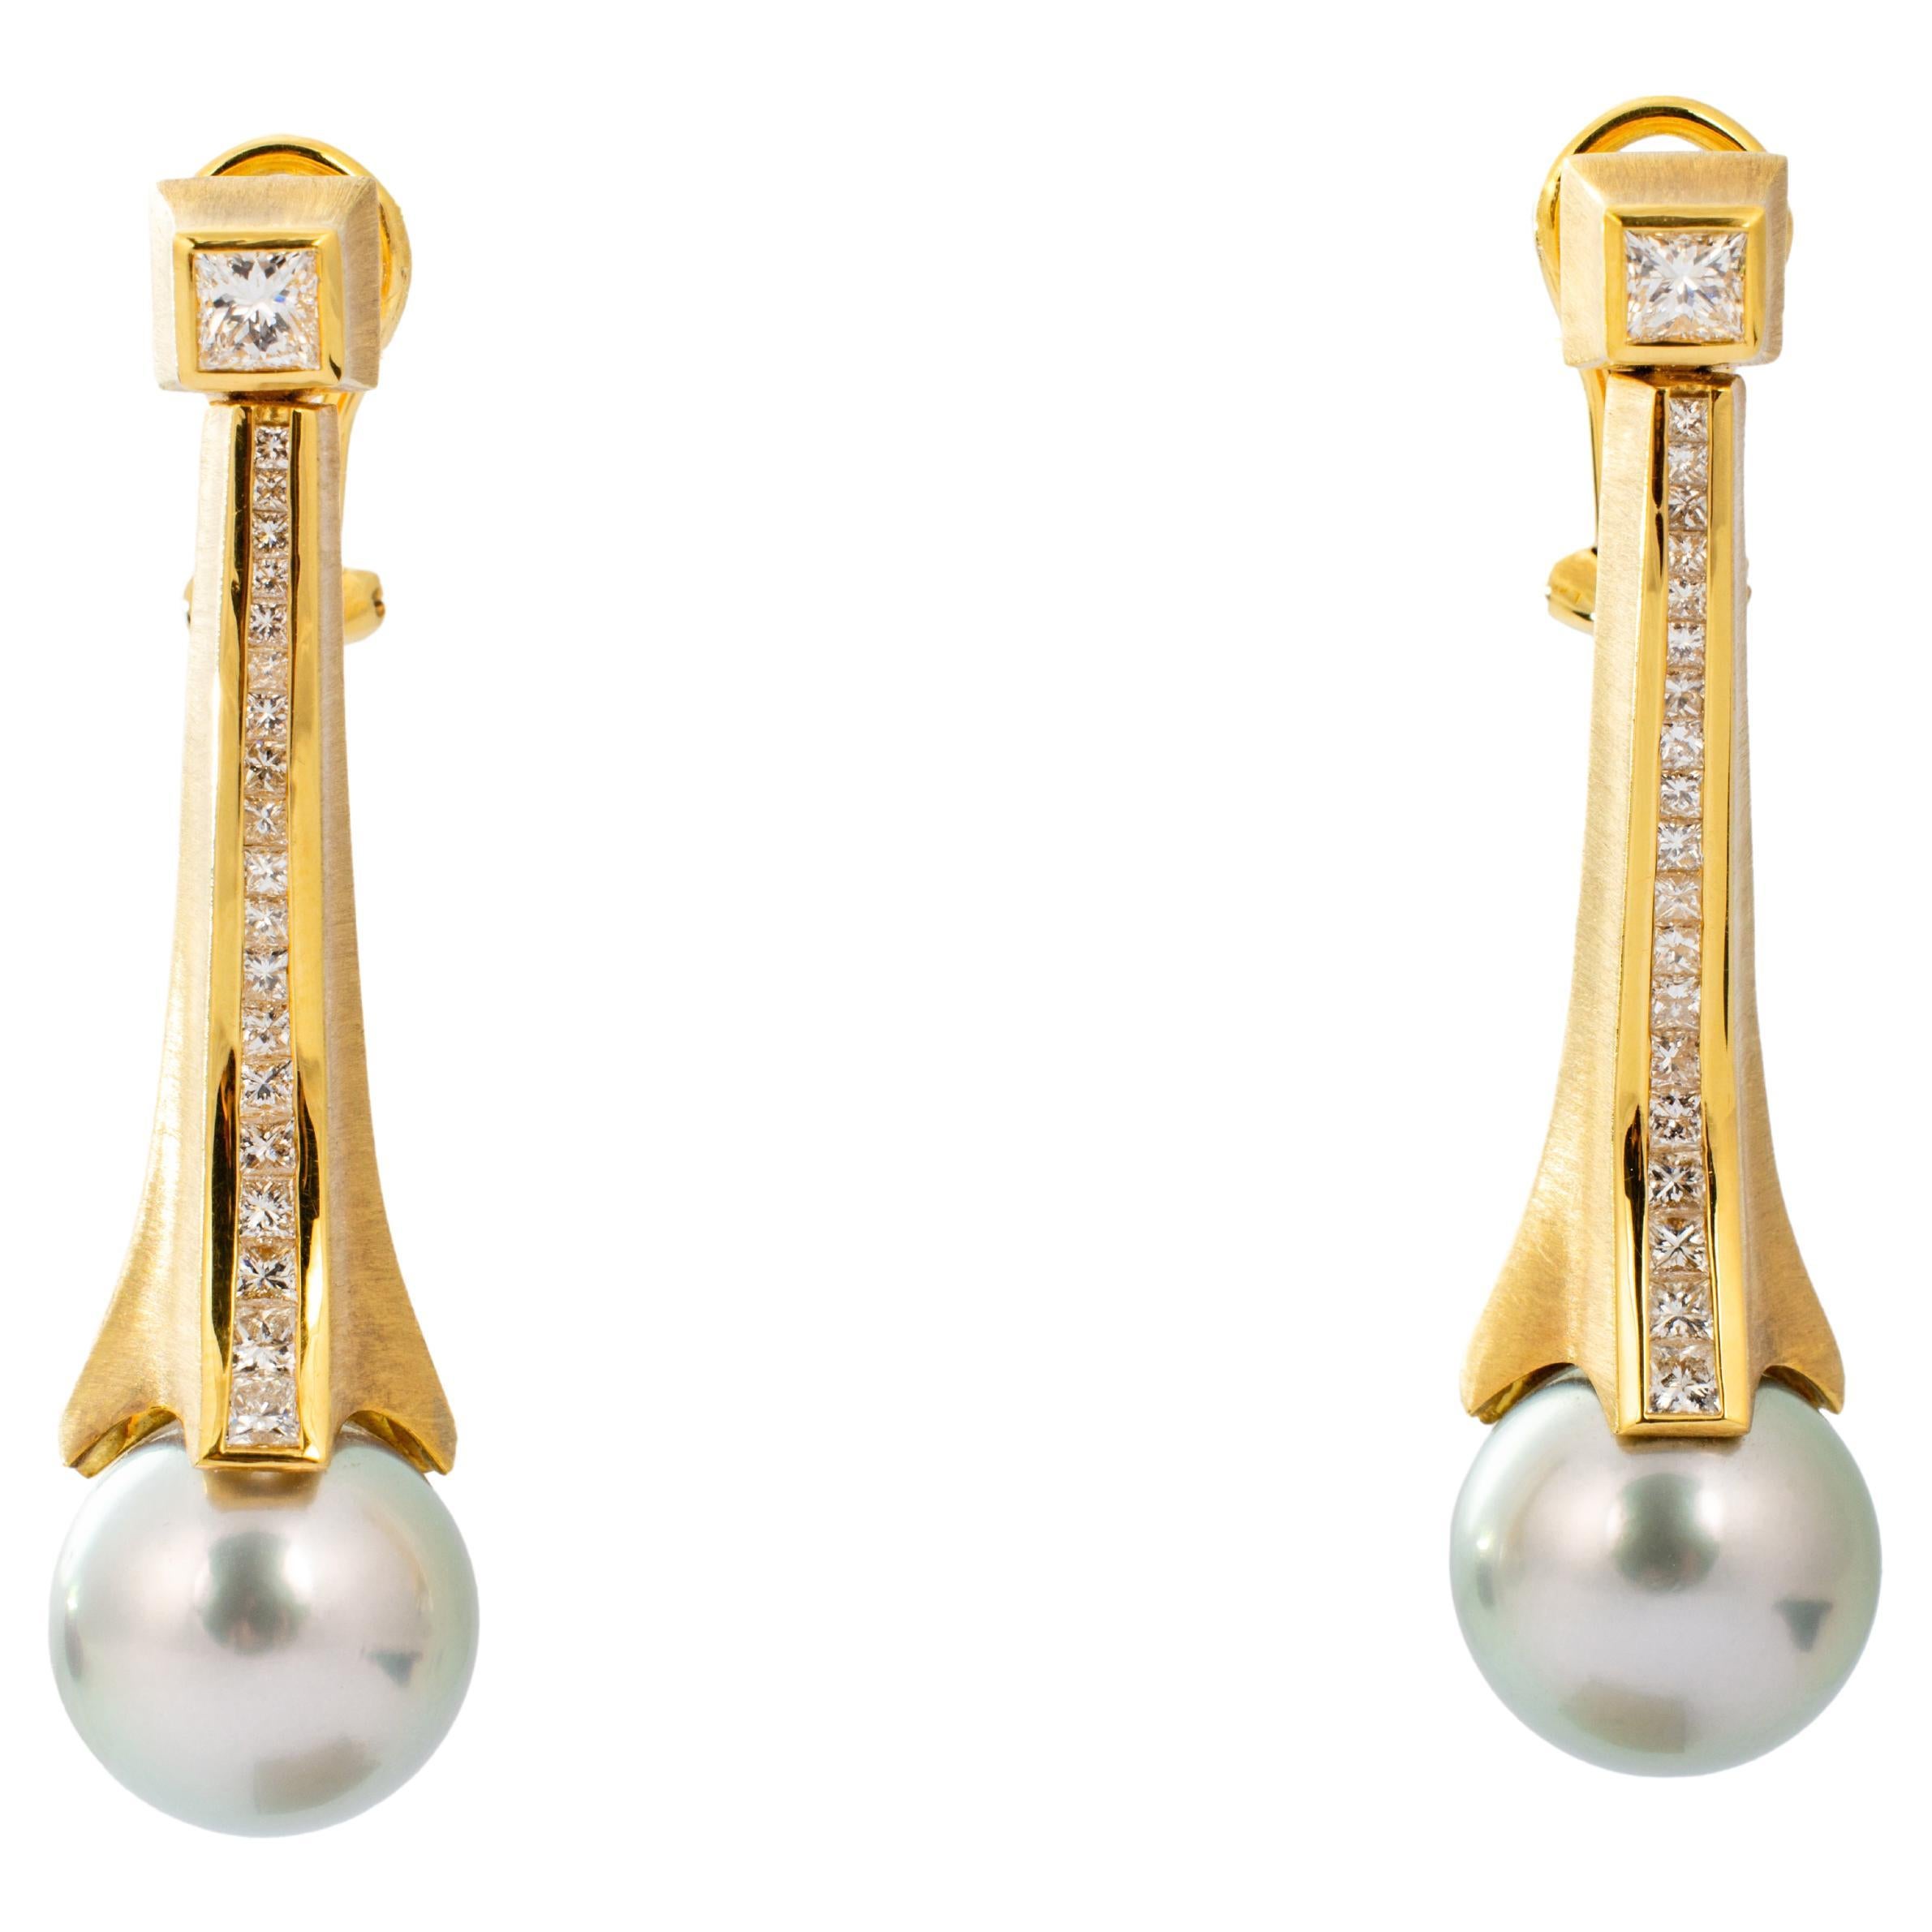 "Costis" Eiffel Earrings, 12.50mm Gray South Sea Pearls, and 1.73 cts Diamonds